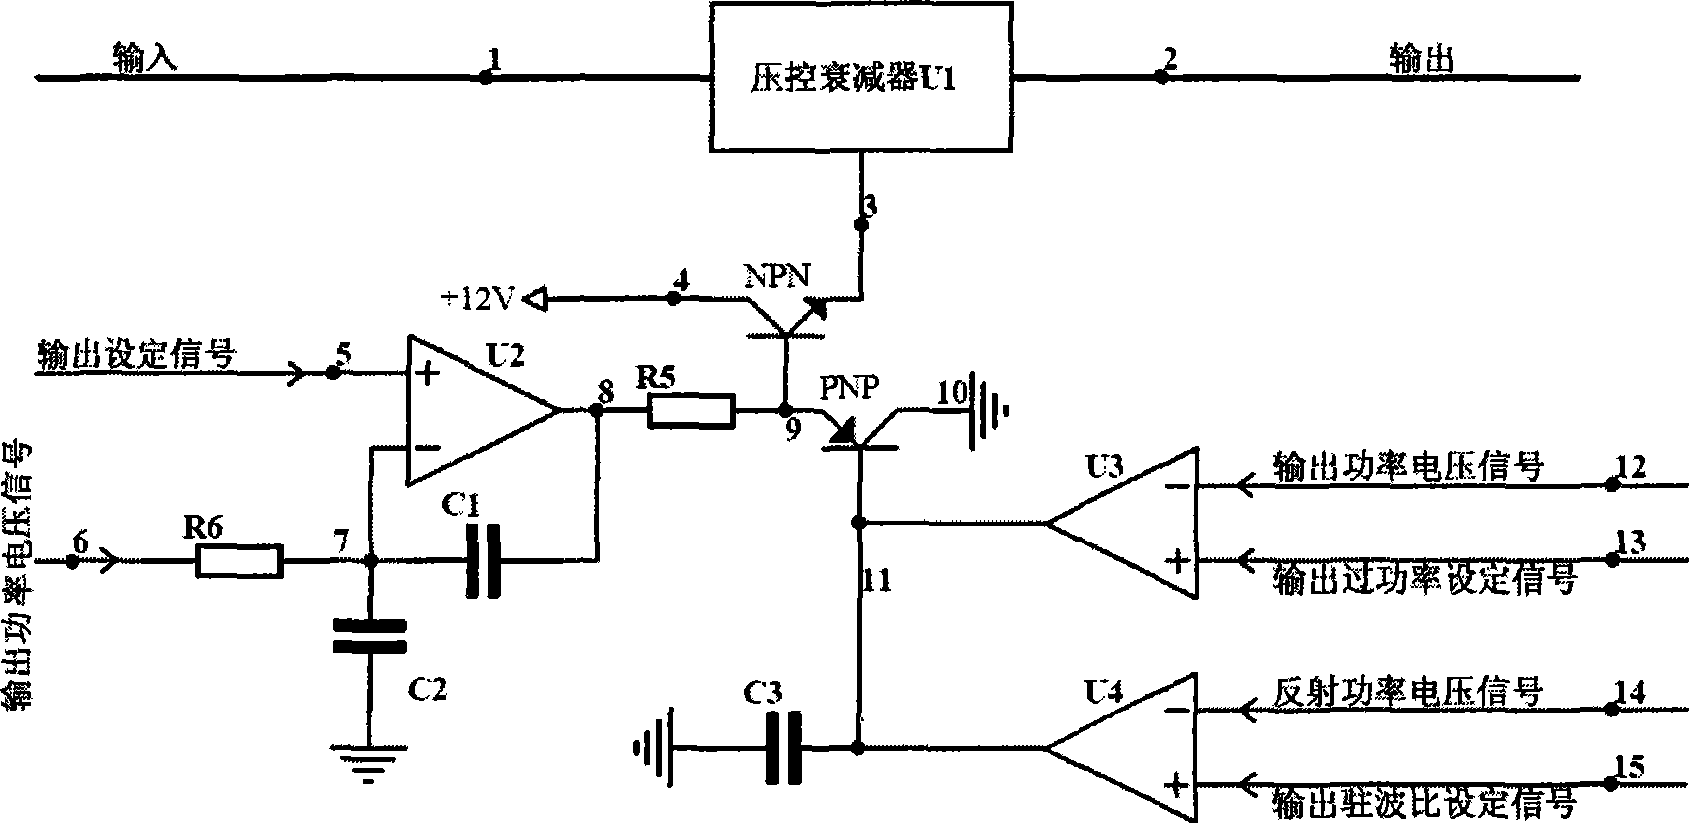 Power amplifier protection device and method for UHF wide-band transmitter